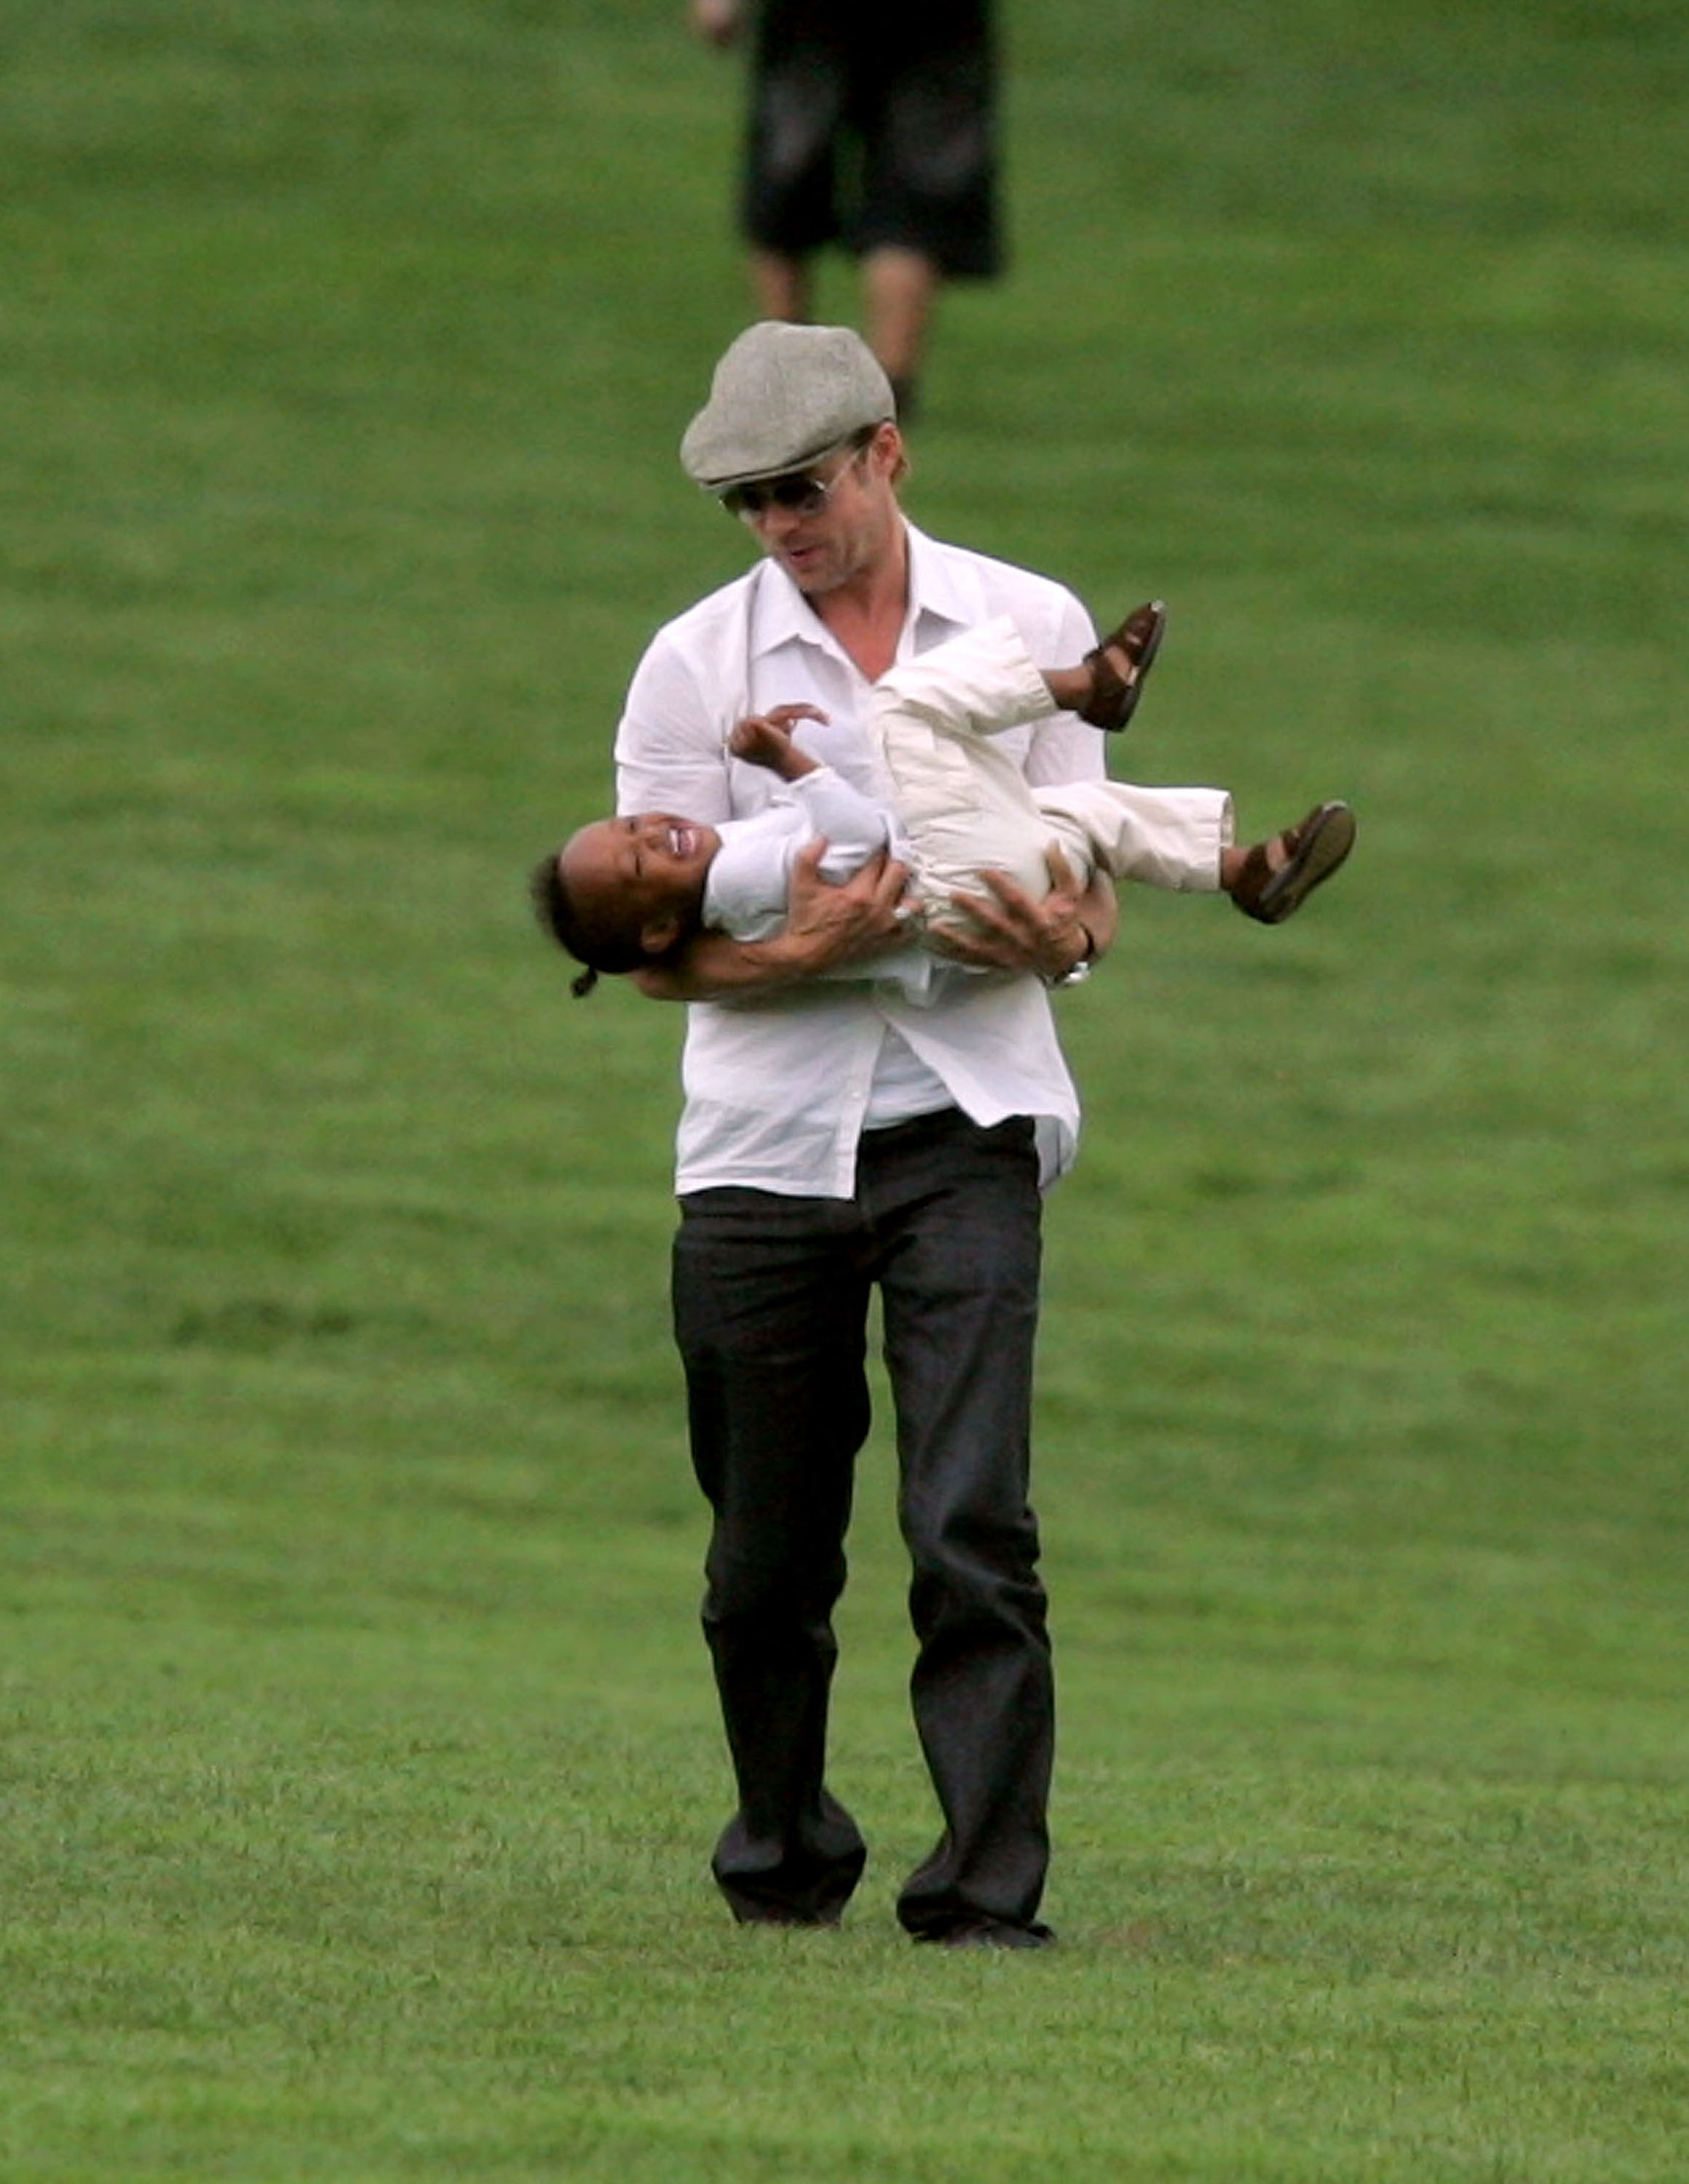 Brad Pitt and his daughter Zahara Jolie-Pitt spotted at Central Park in New York City on August 28, 2007 | Source: Getty Images